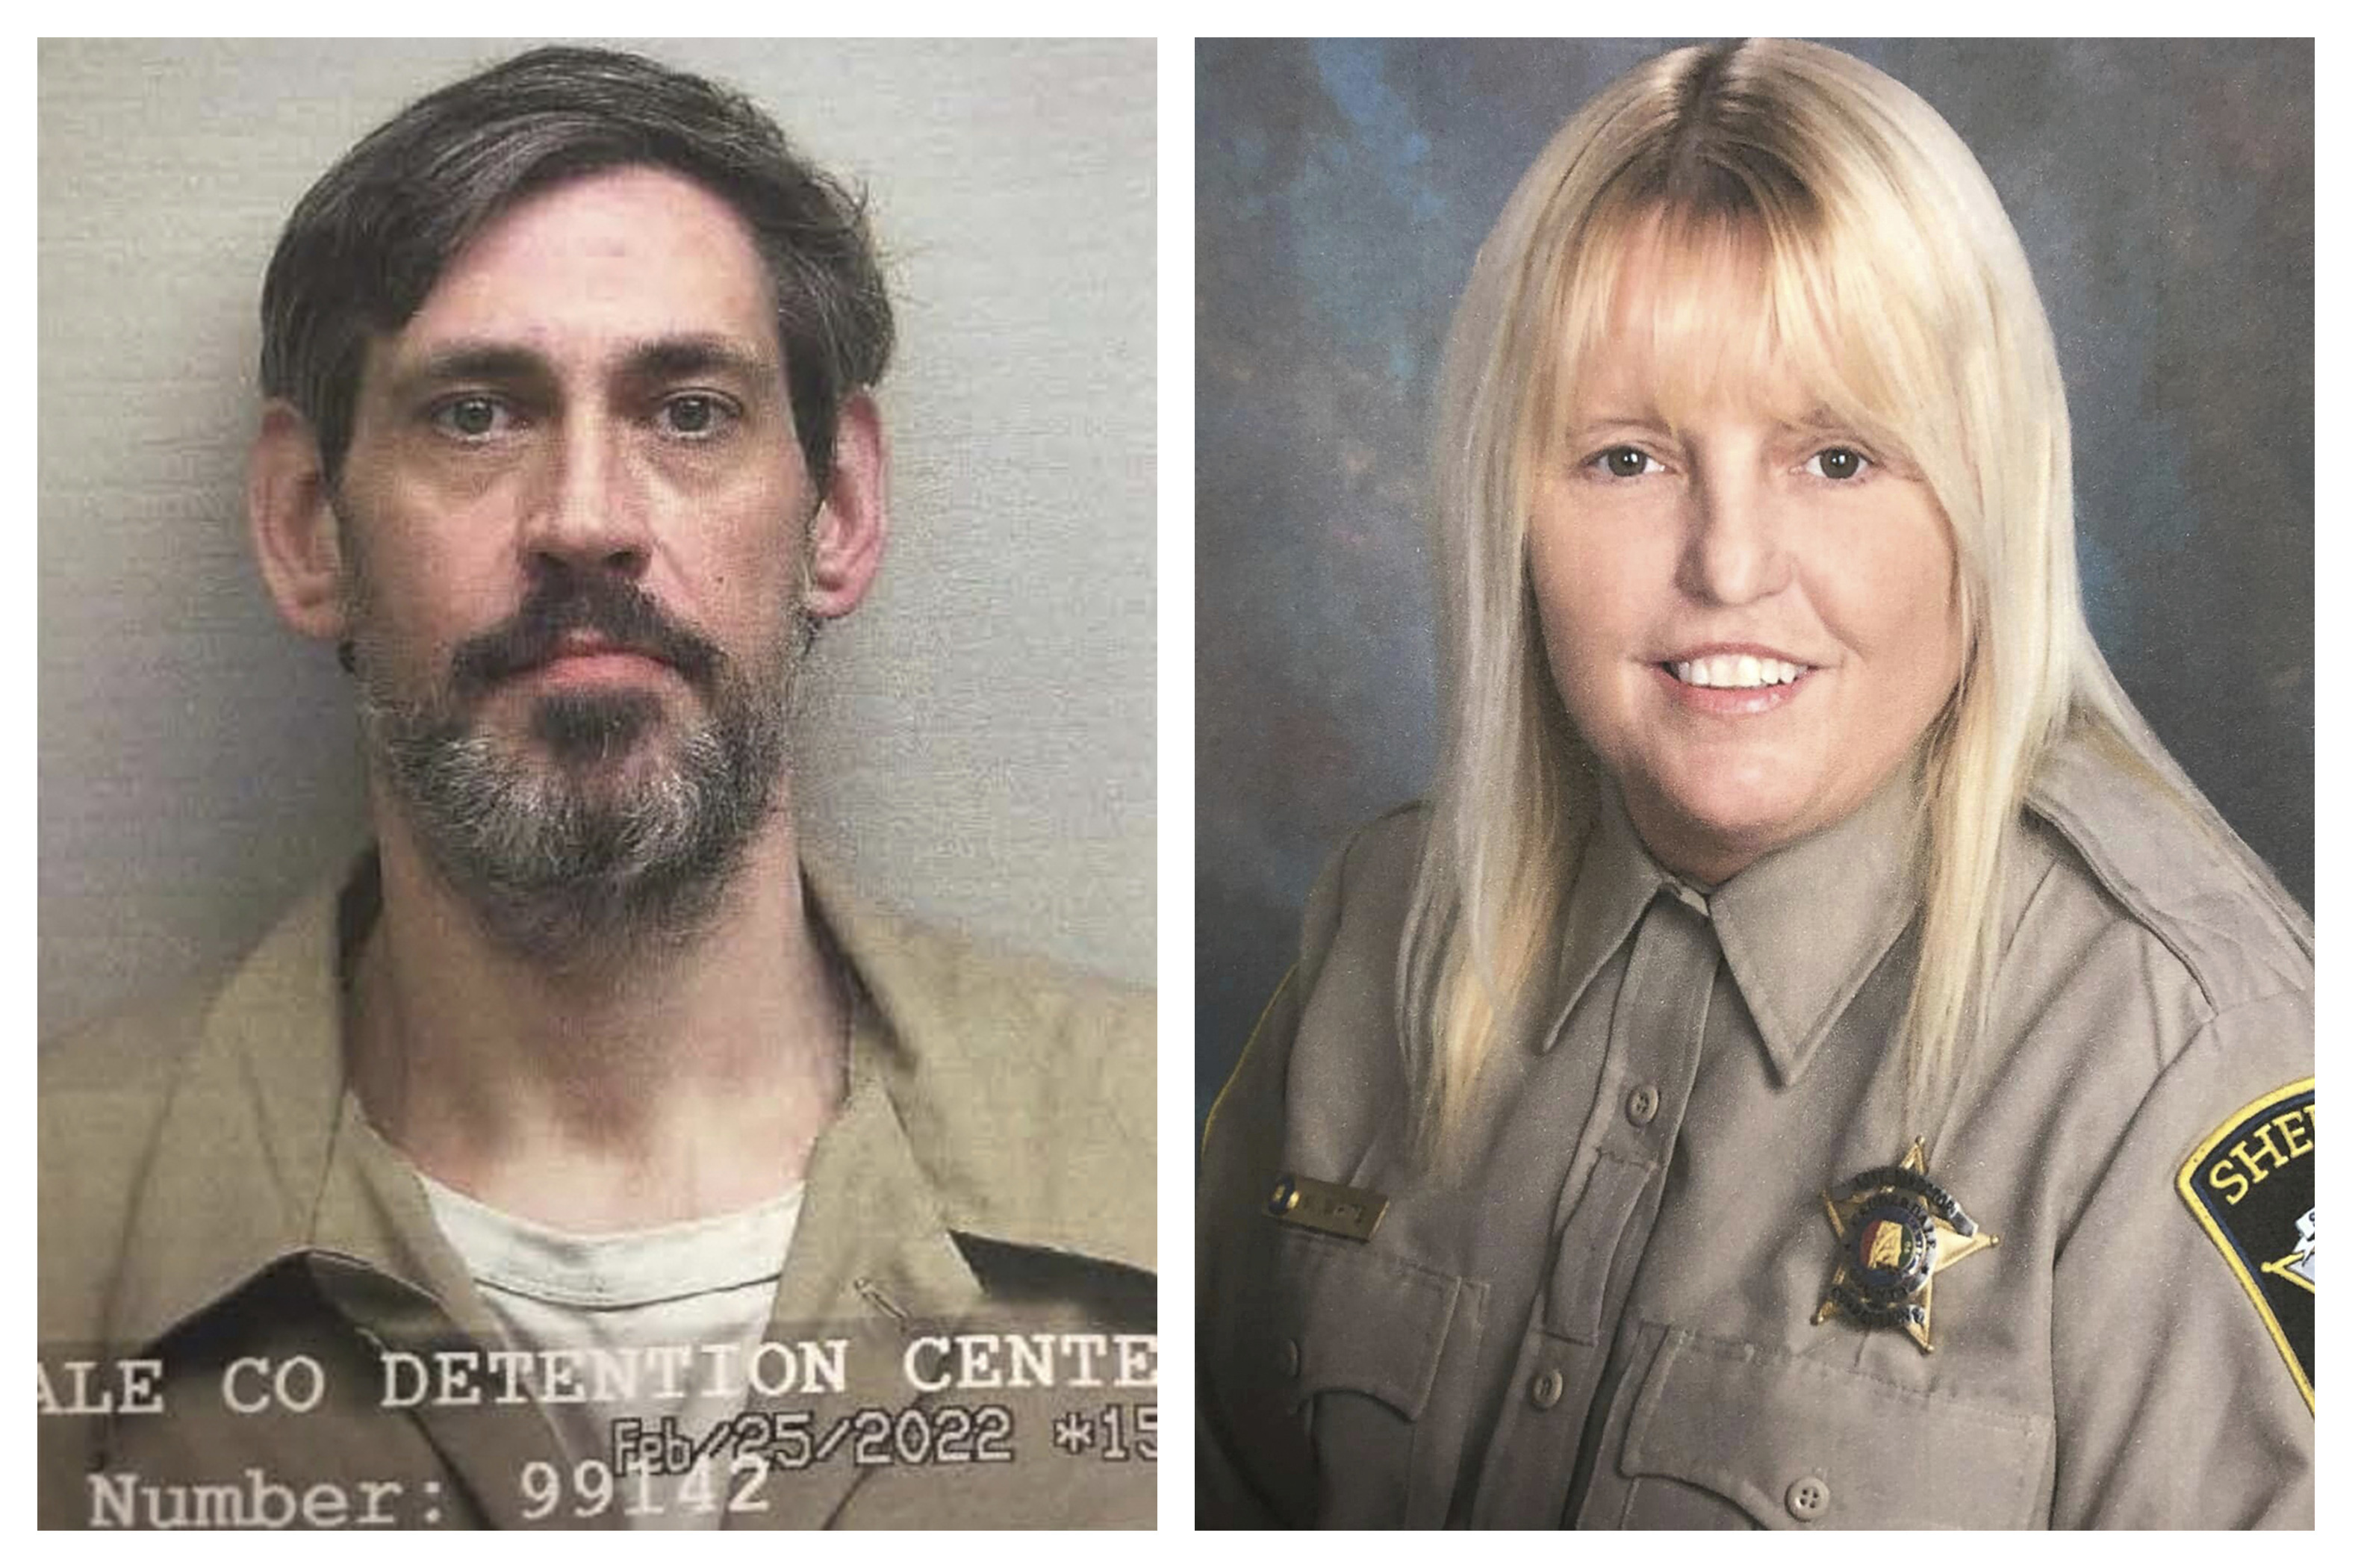 This combination of photos provided by the U.S. Marshals Service and Lauderdale County Sheriff's Office in April 2022 shows inmate Casey White, left, and Assistant Director of Corrections Vicky White. (U.S. Marshals Service &amp; Lauderdale County Sheriff's Office/AP)